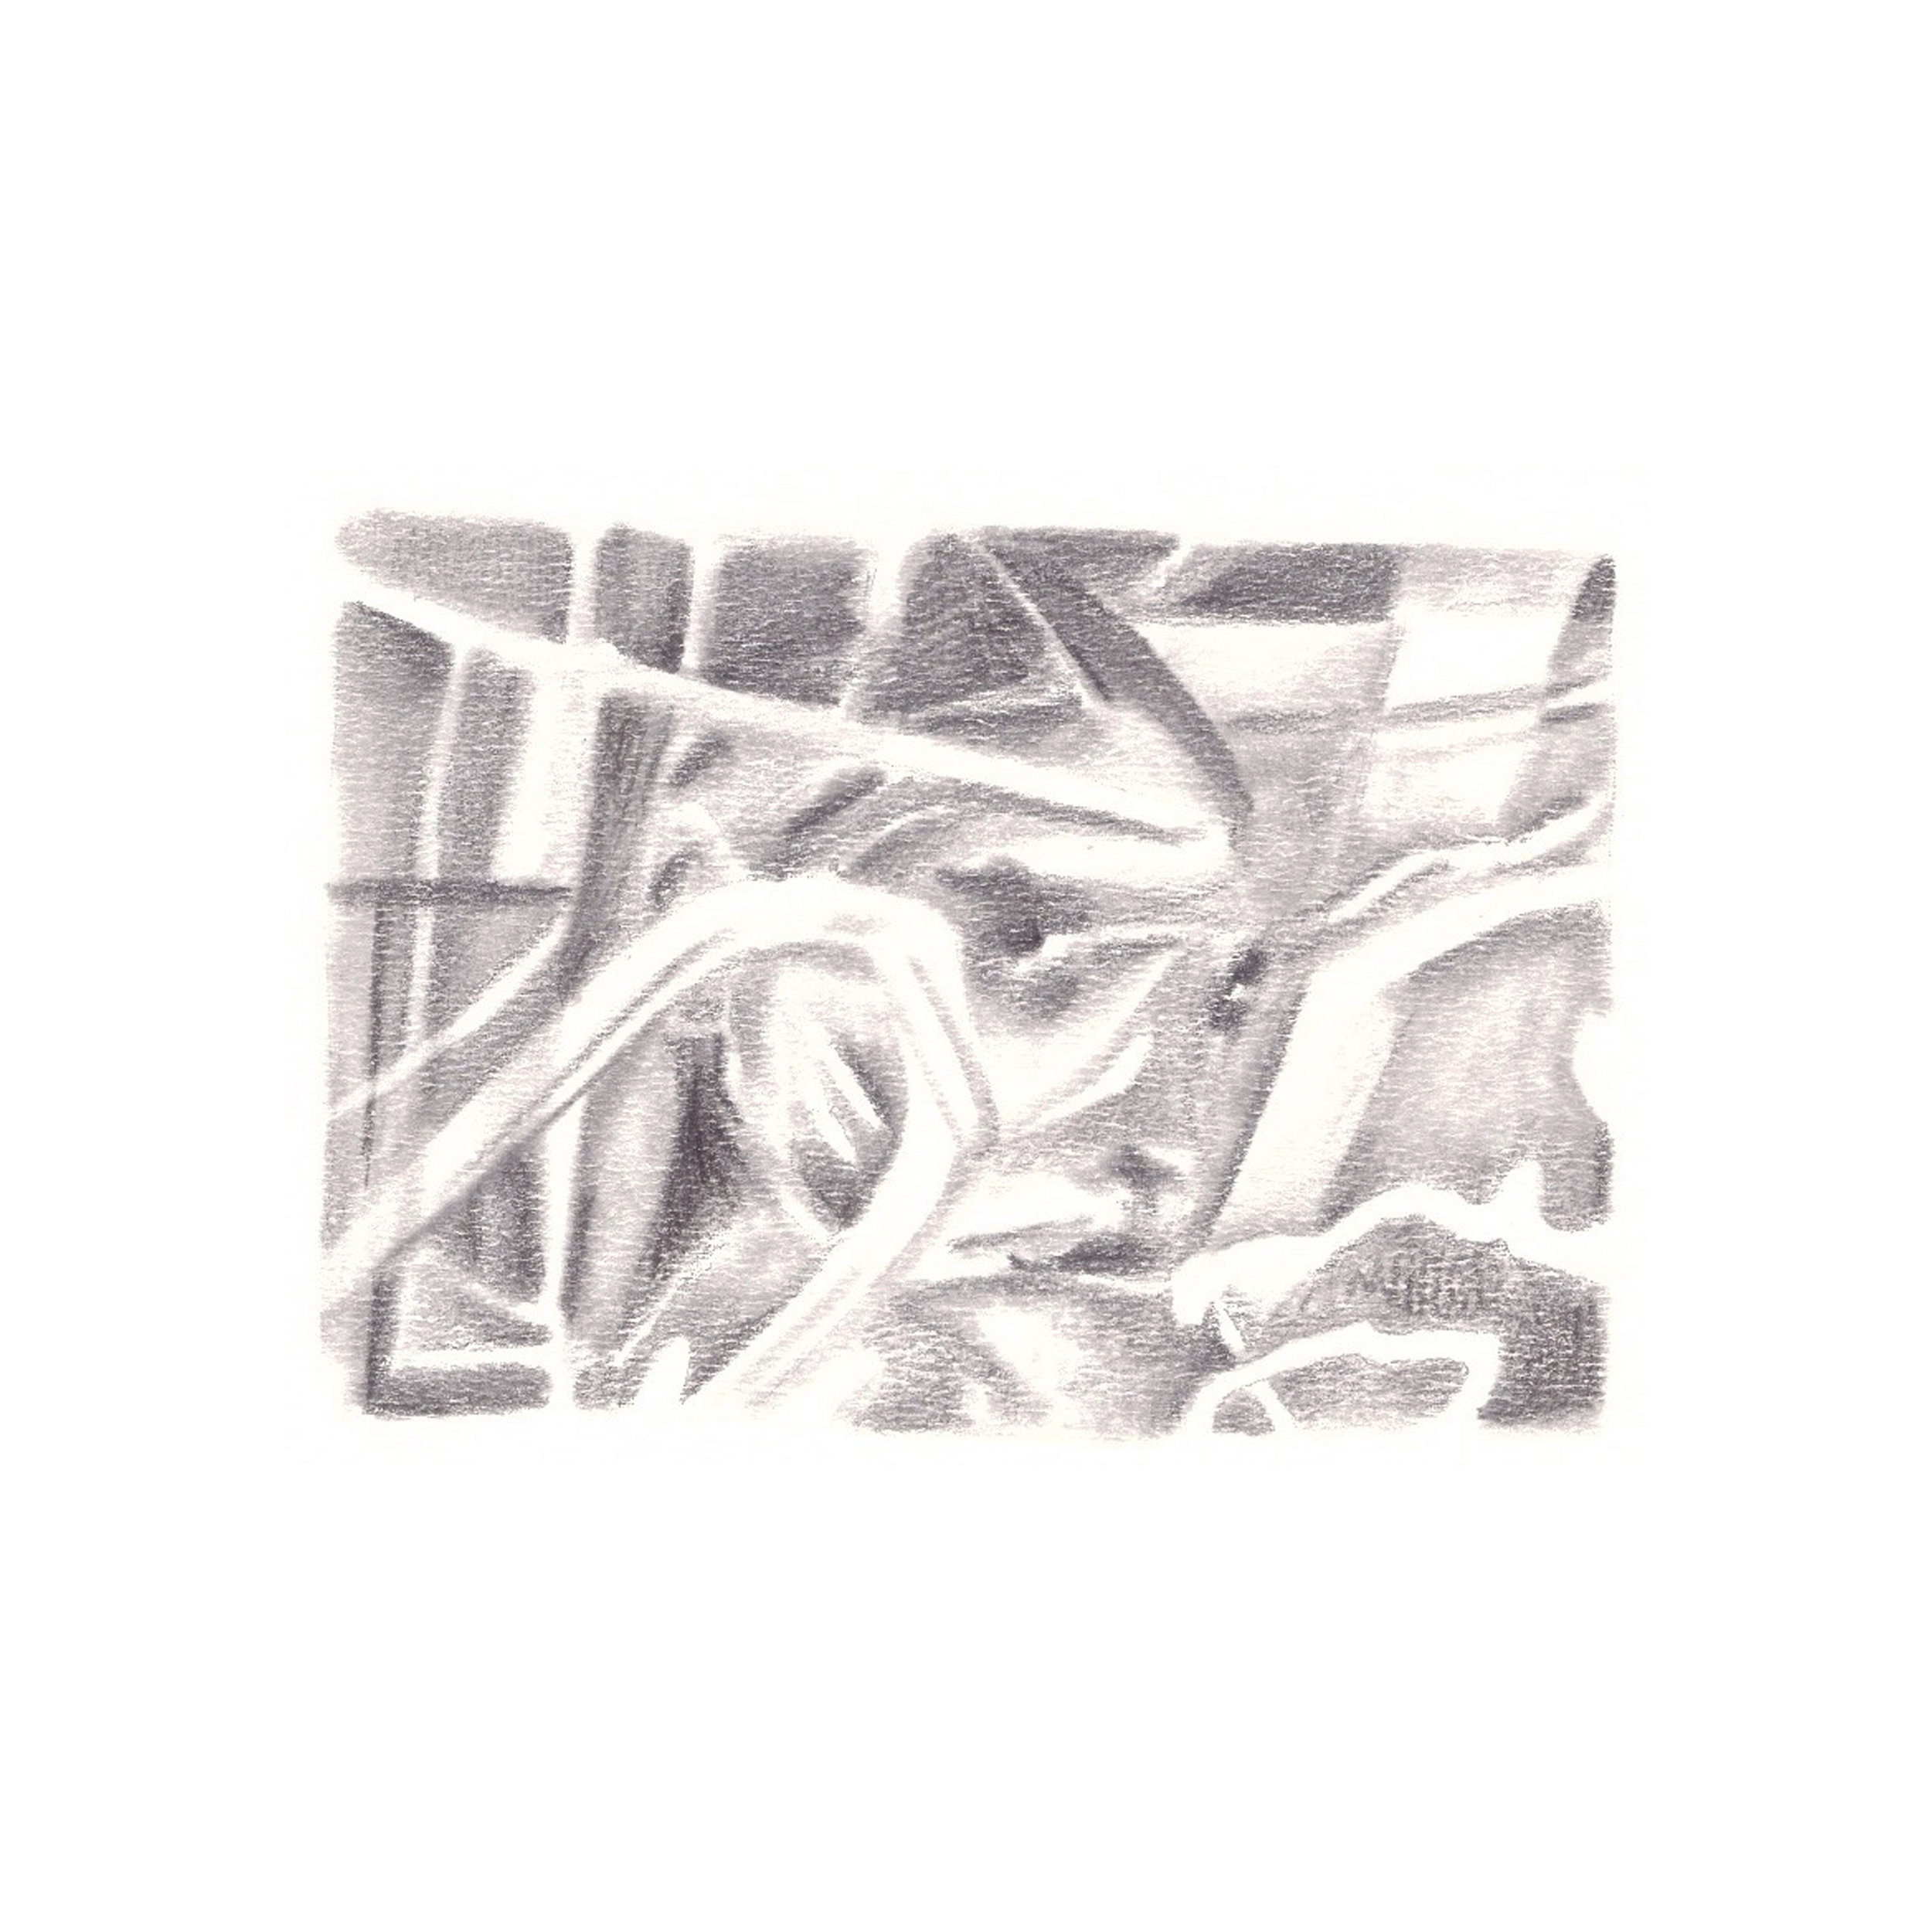 Untitled, 2017, pencil on A4 paper, ca. 10 x 5cm 